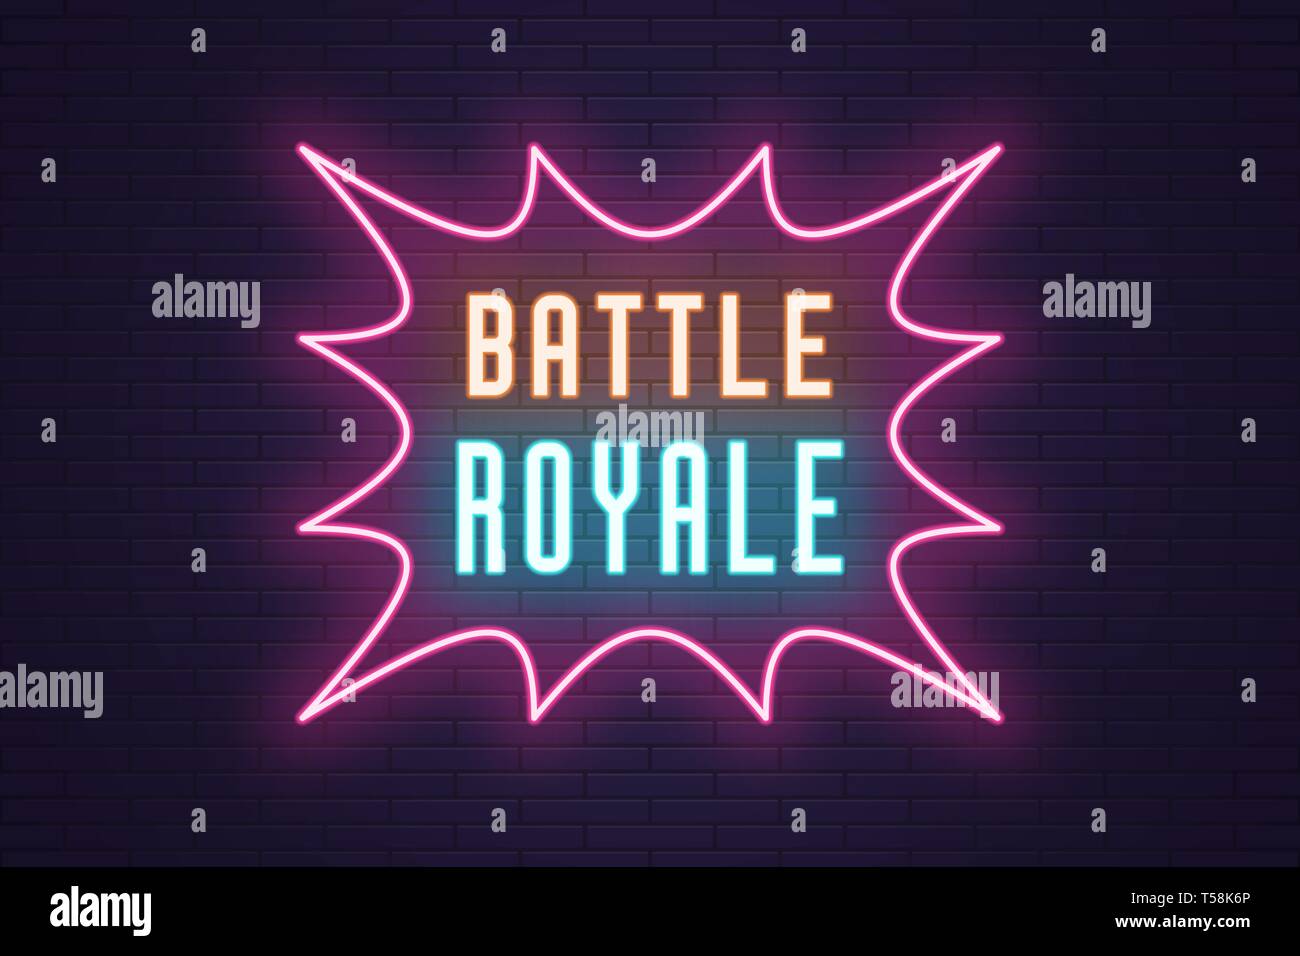 Battle Royale High Resolution Stock Photography And Images Alamy